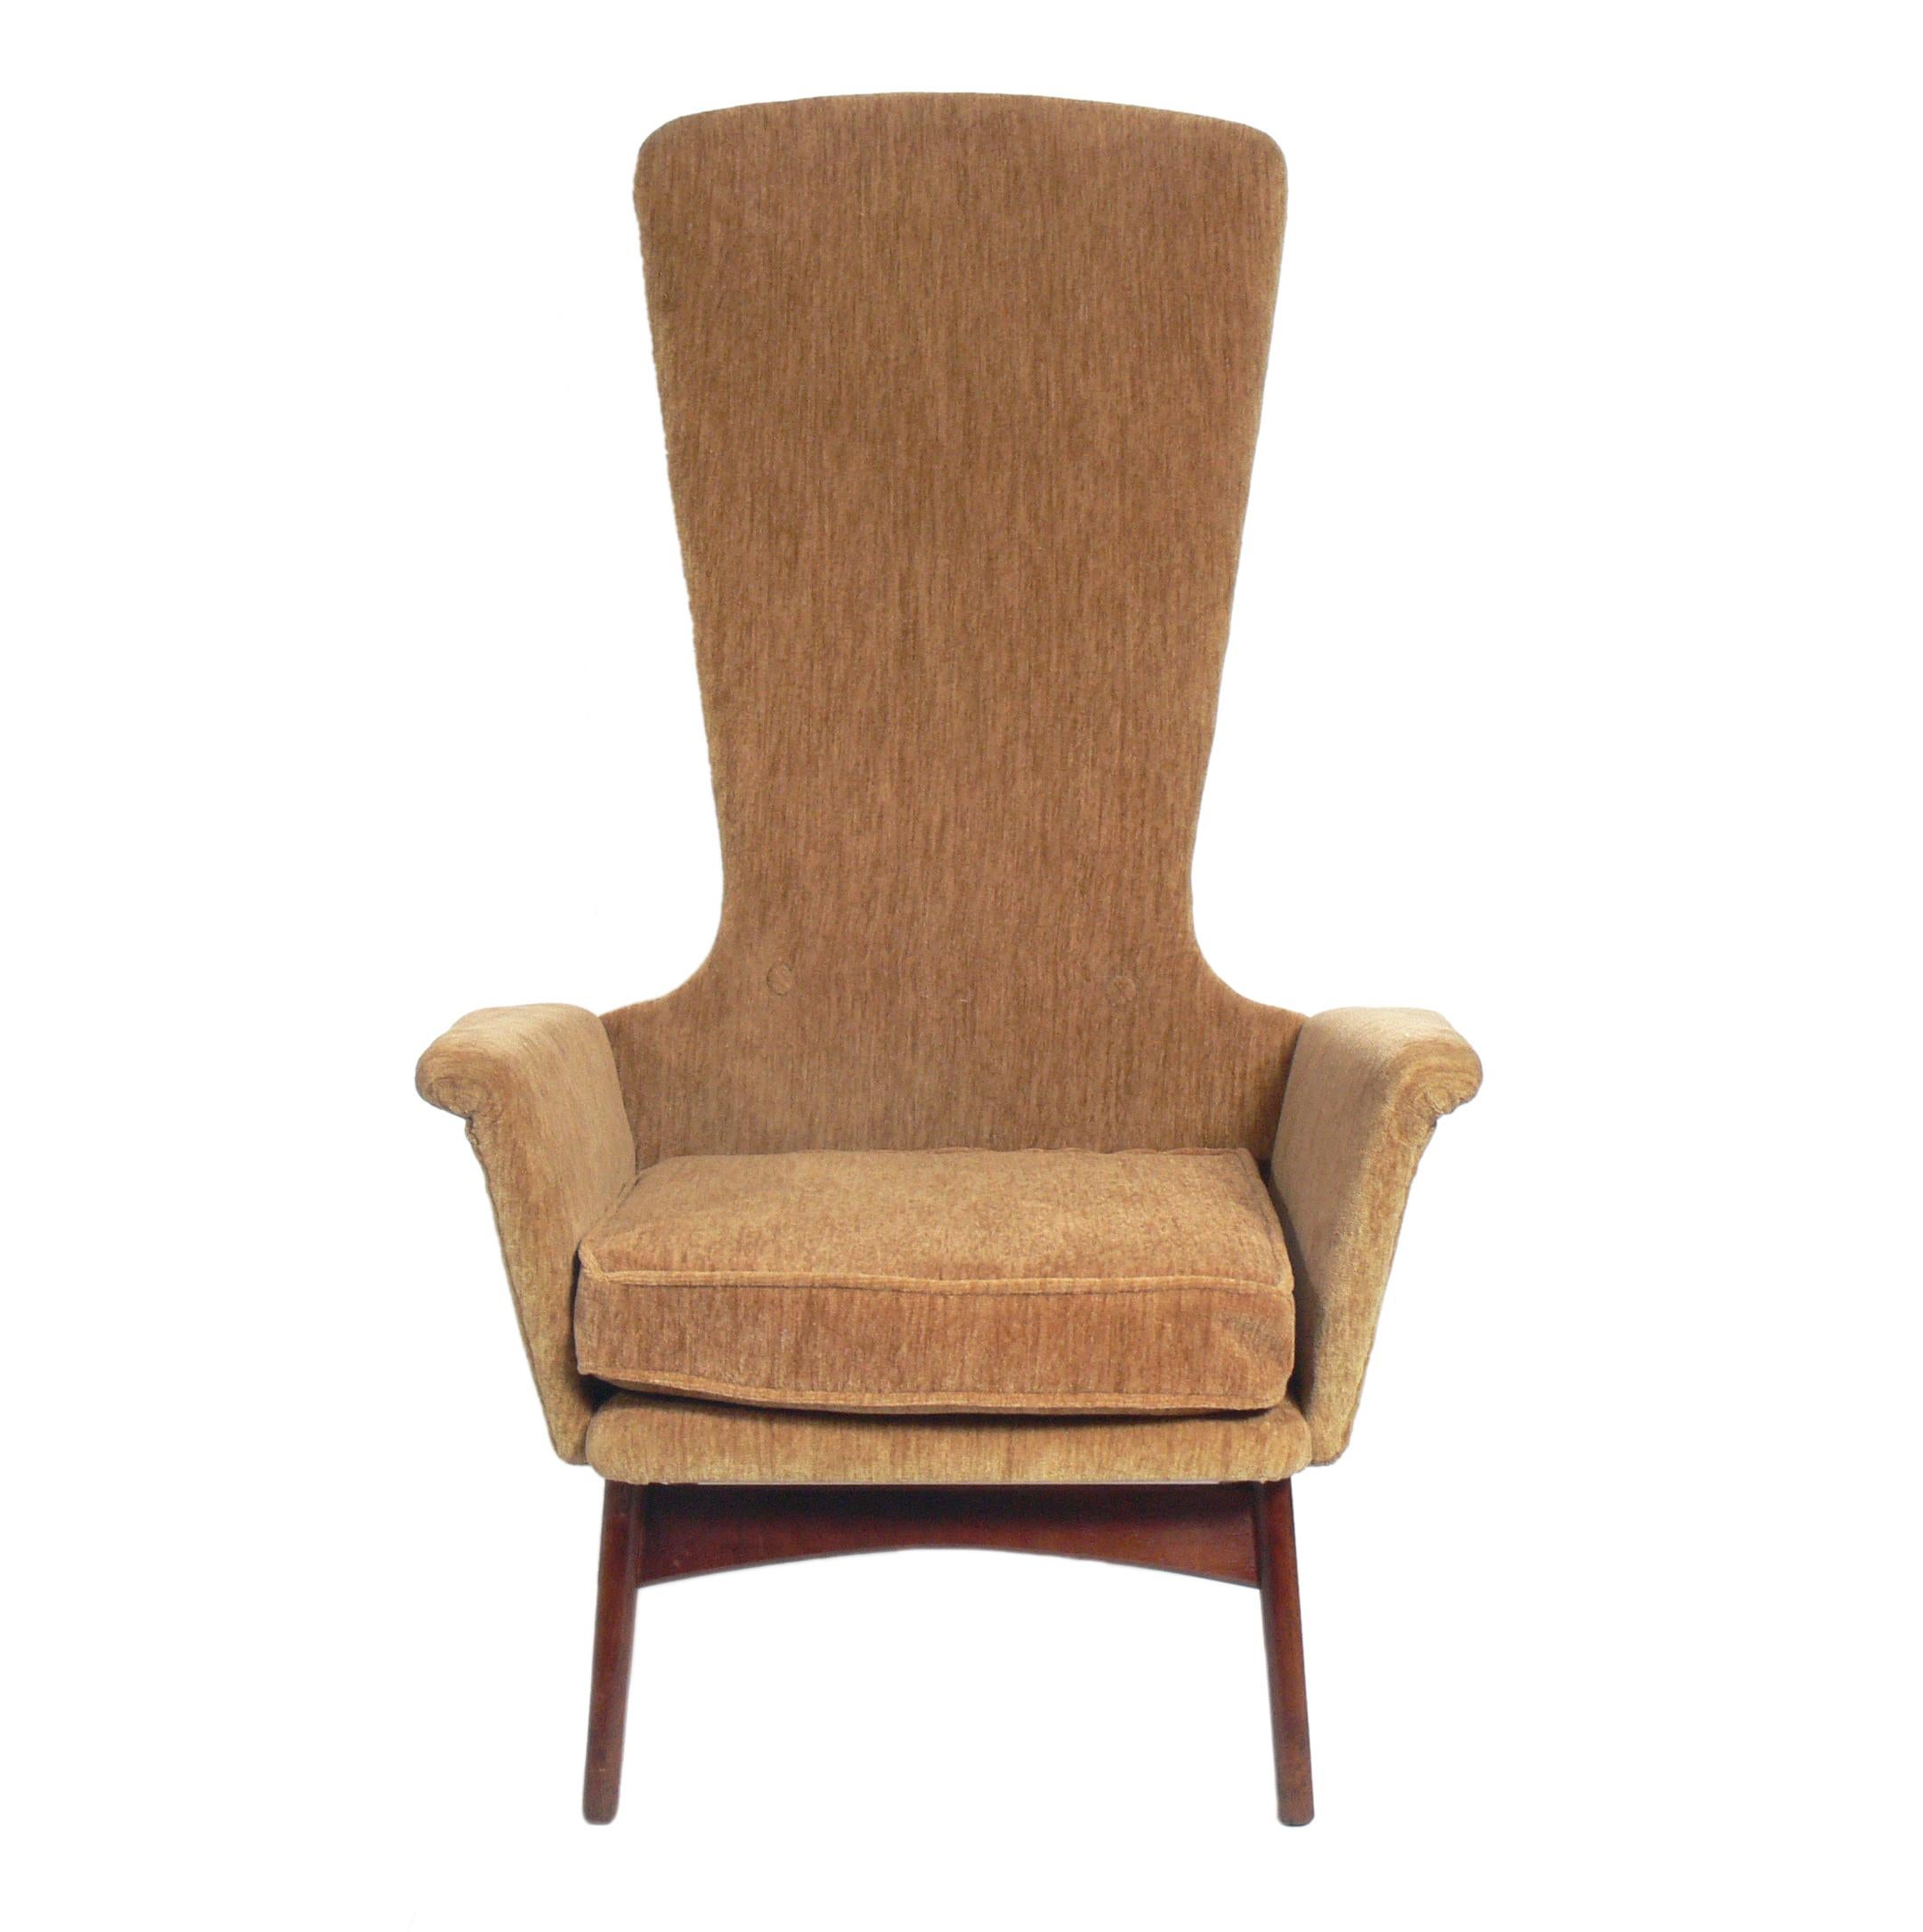 Sculptural Tall Back Lounge Chair, designed by Adrian Pearsall for Craft Associates, American, circa 1960s. This piece is currently being reupholstered and can be completed in your fabric. The price noted INCLUDES reupholstery in your fabric. The